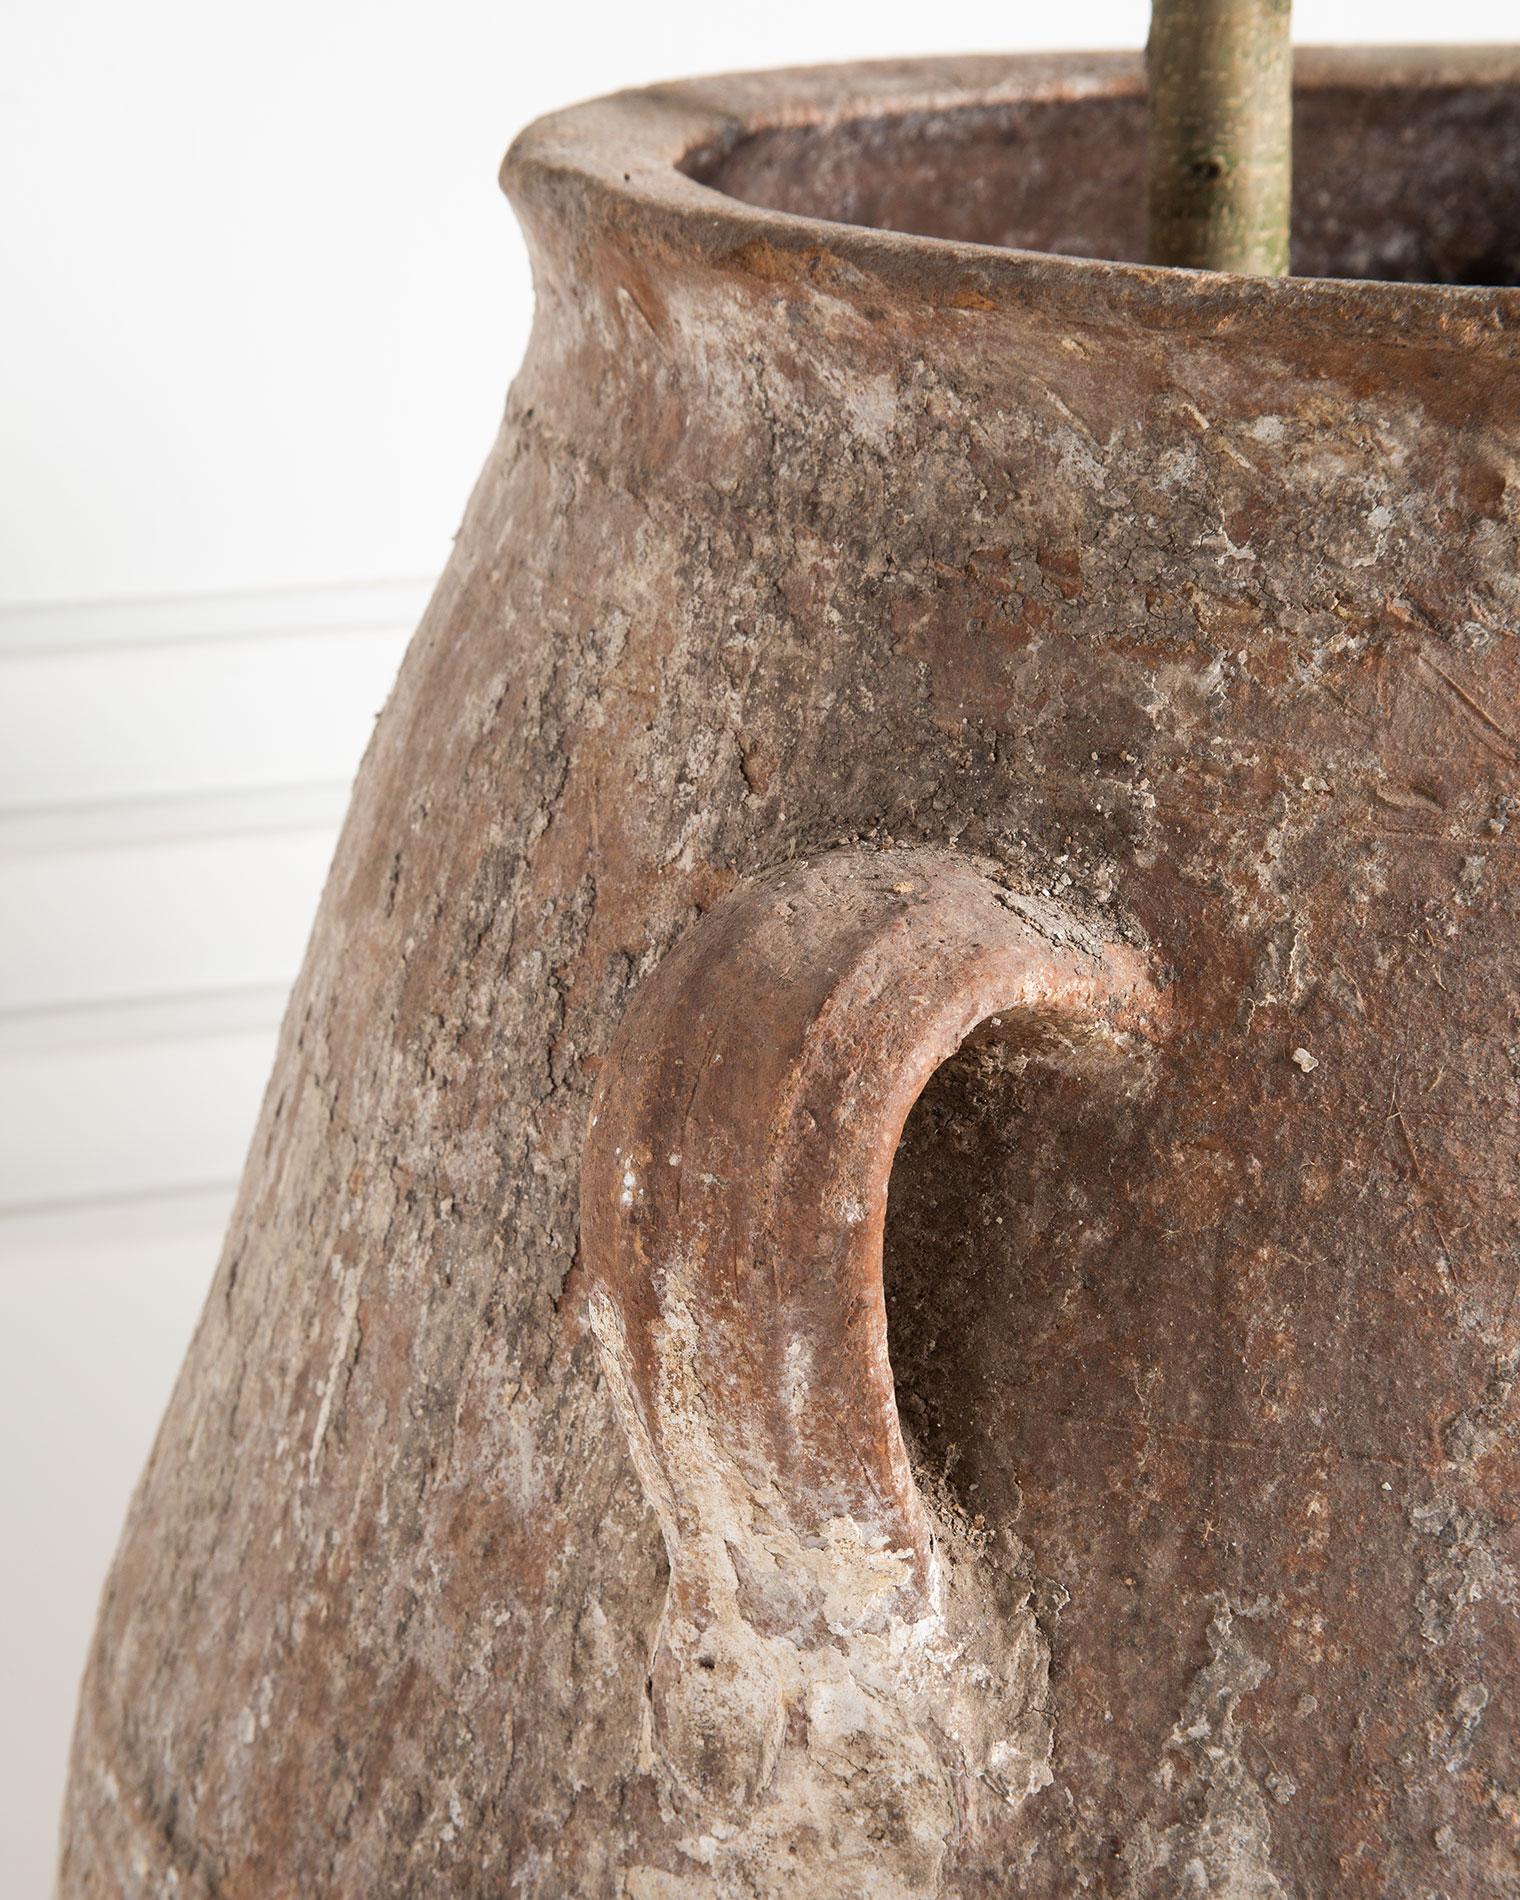 A monumental antique Turkish Olive Jar featuring layers of beautiful patina and age, reflective of its time spent as a utilitarian vessel for the storage of olive oil and olives in the Mediterranean. 

This can be used indoors or outdoors and